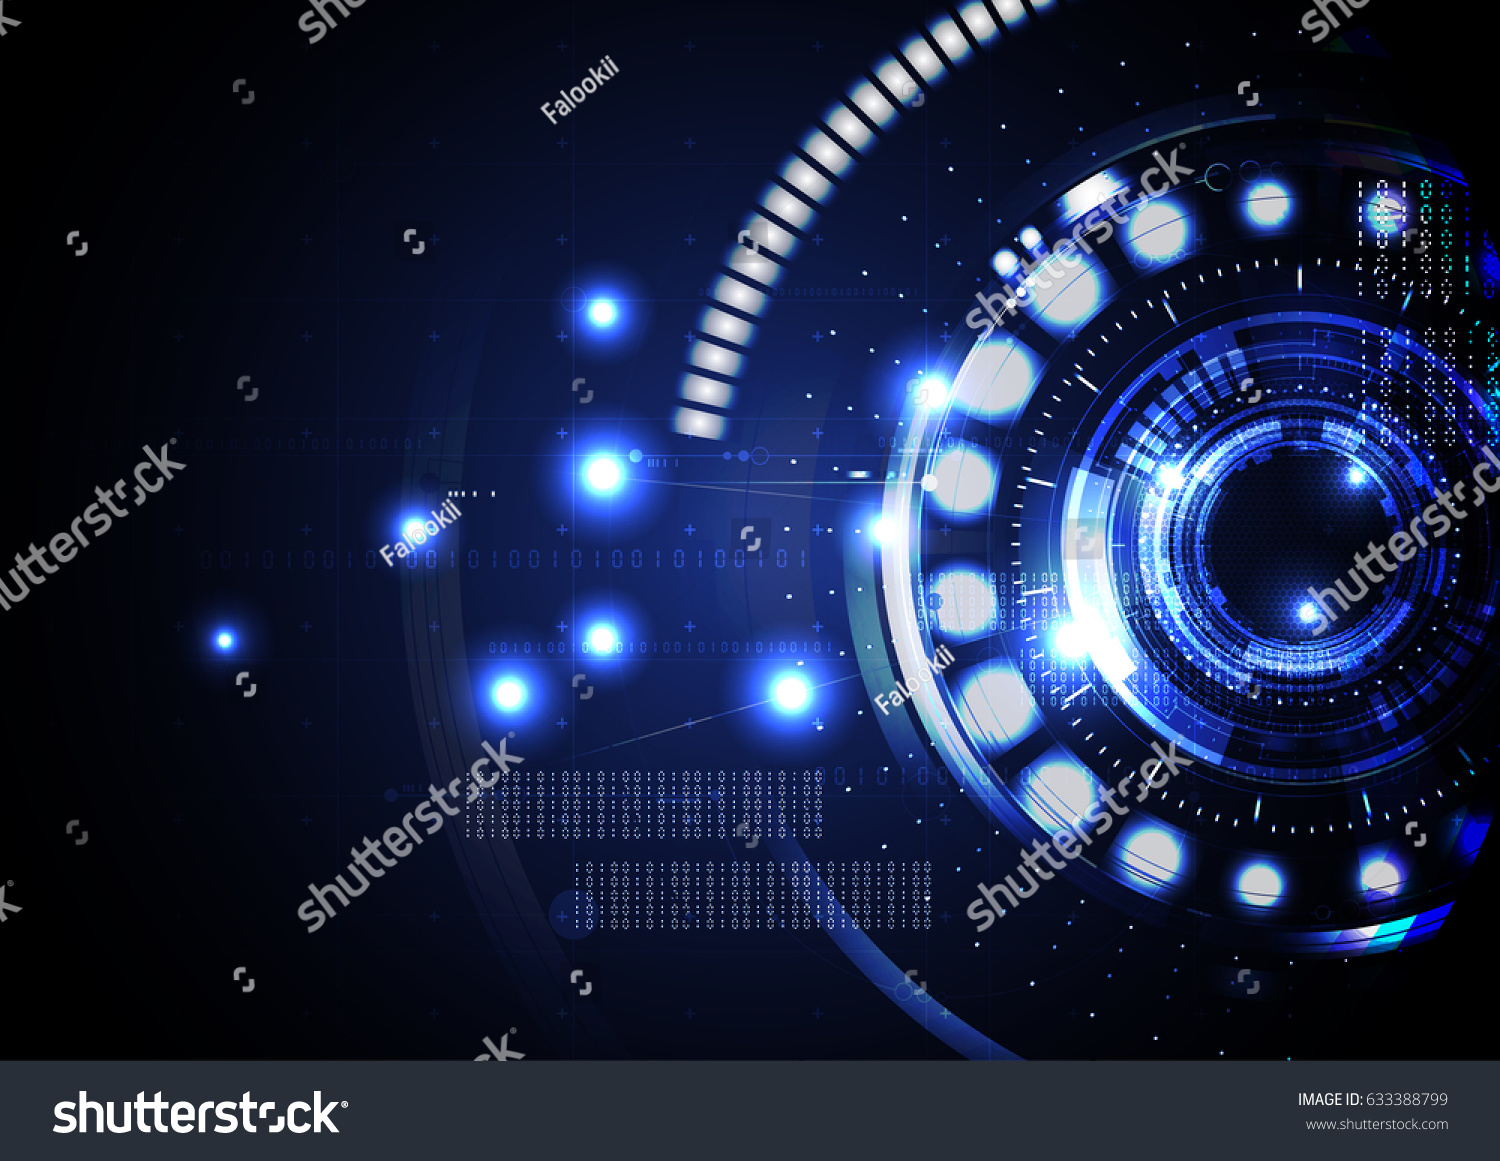 Technological abstract digital cyber light background vector design #633388799